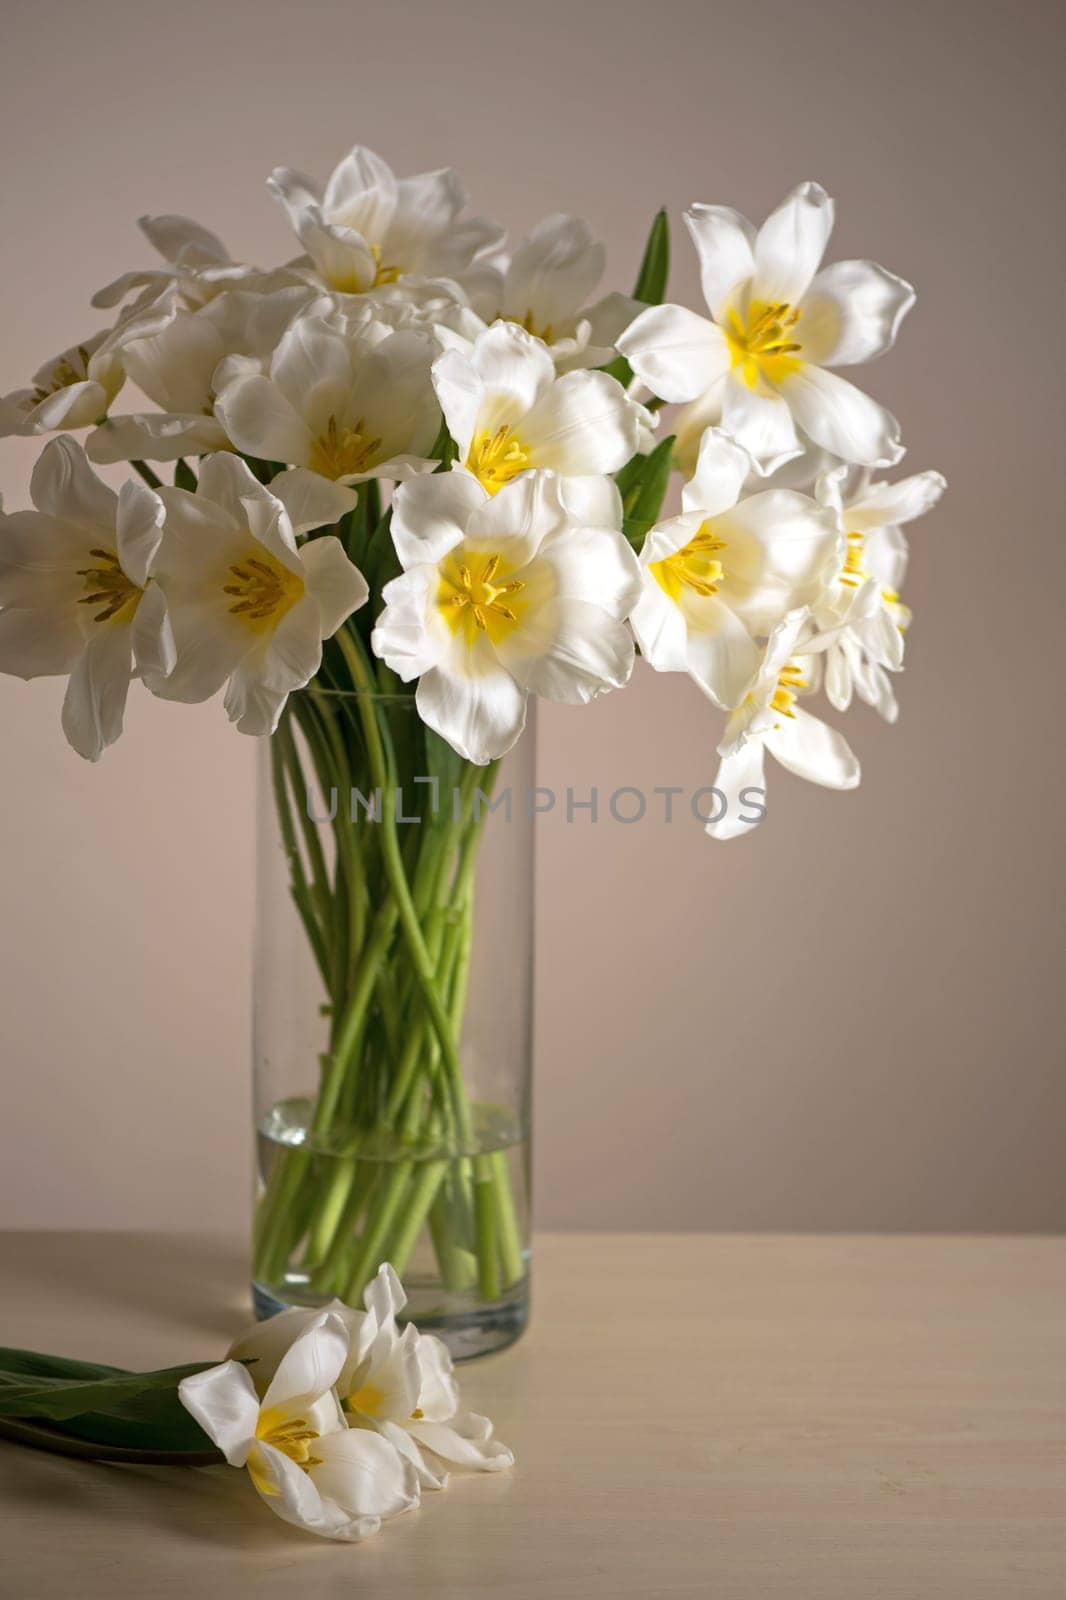 Bouquet of fresh white flowers in glass vase with green isolated flower. White spring tulips in a vase on a white wooden table. by aprilphoto